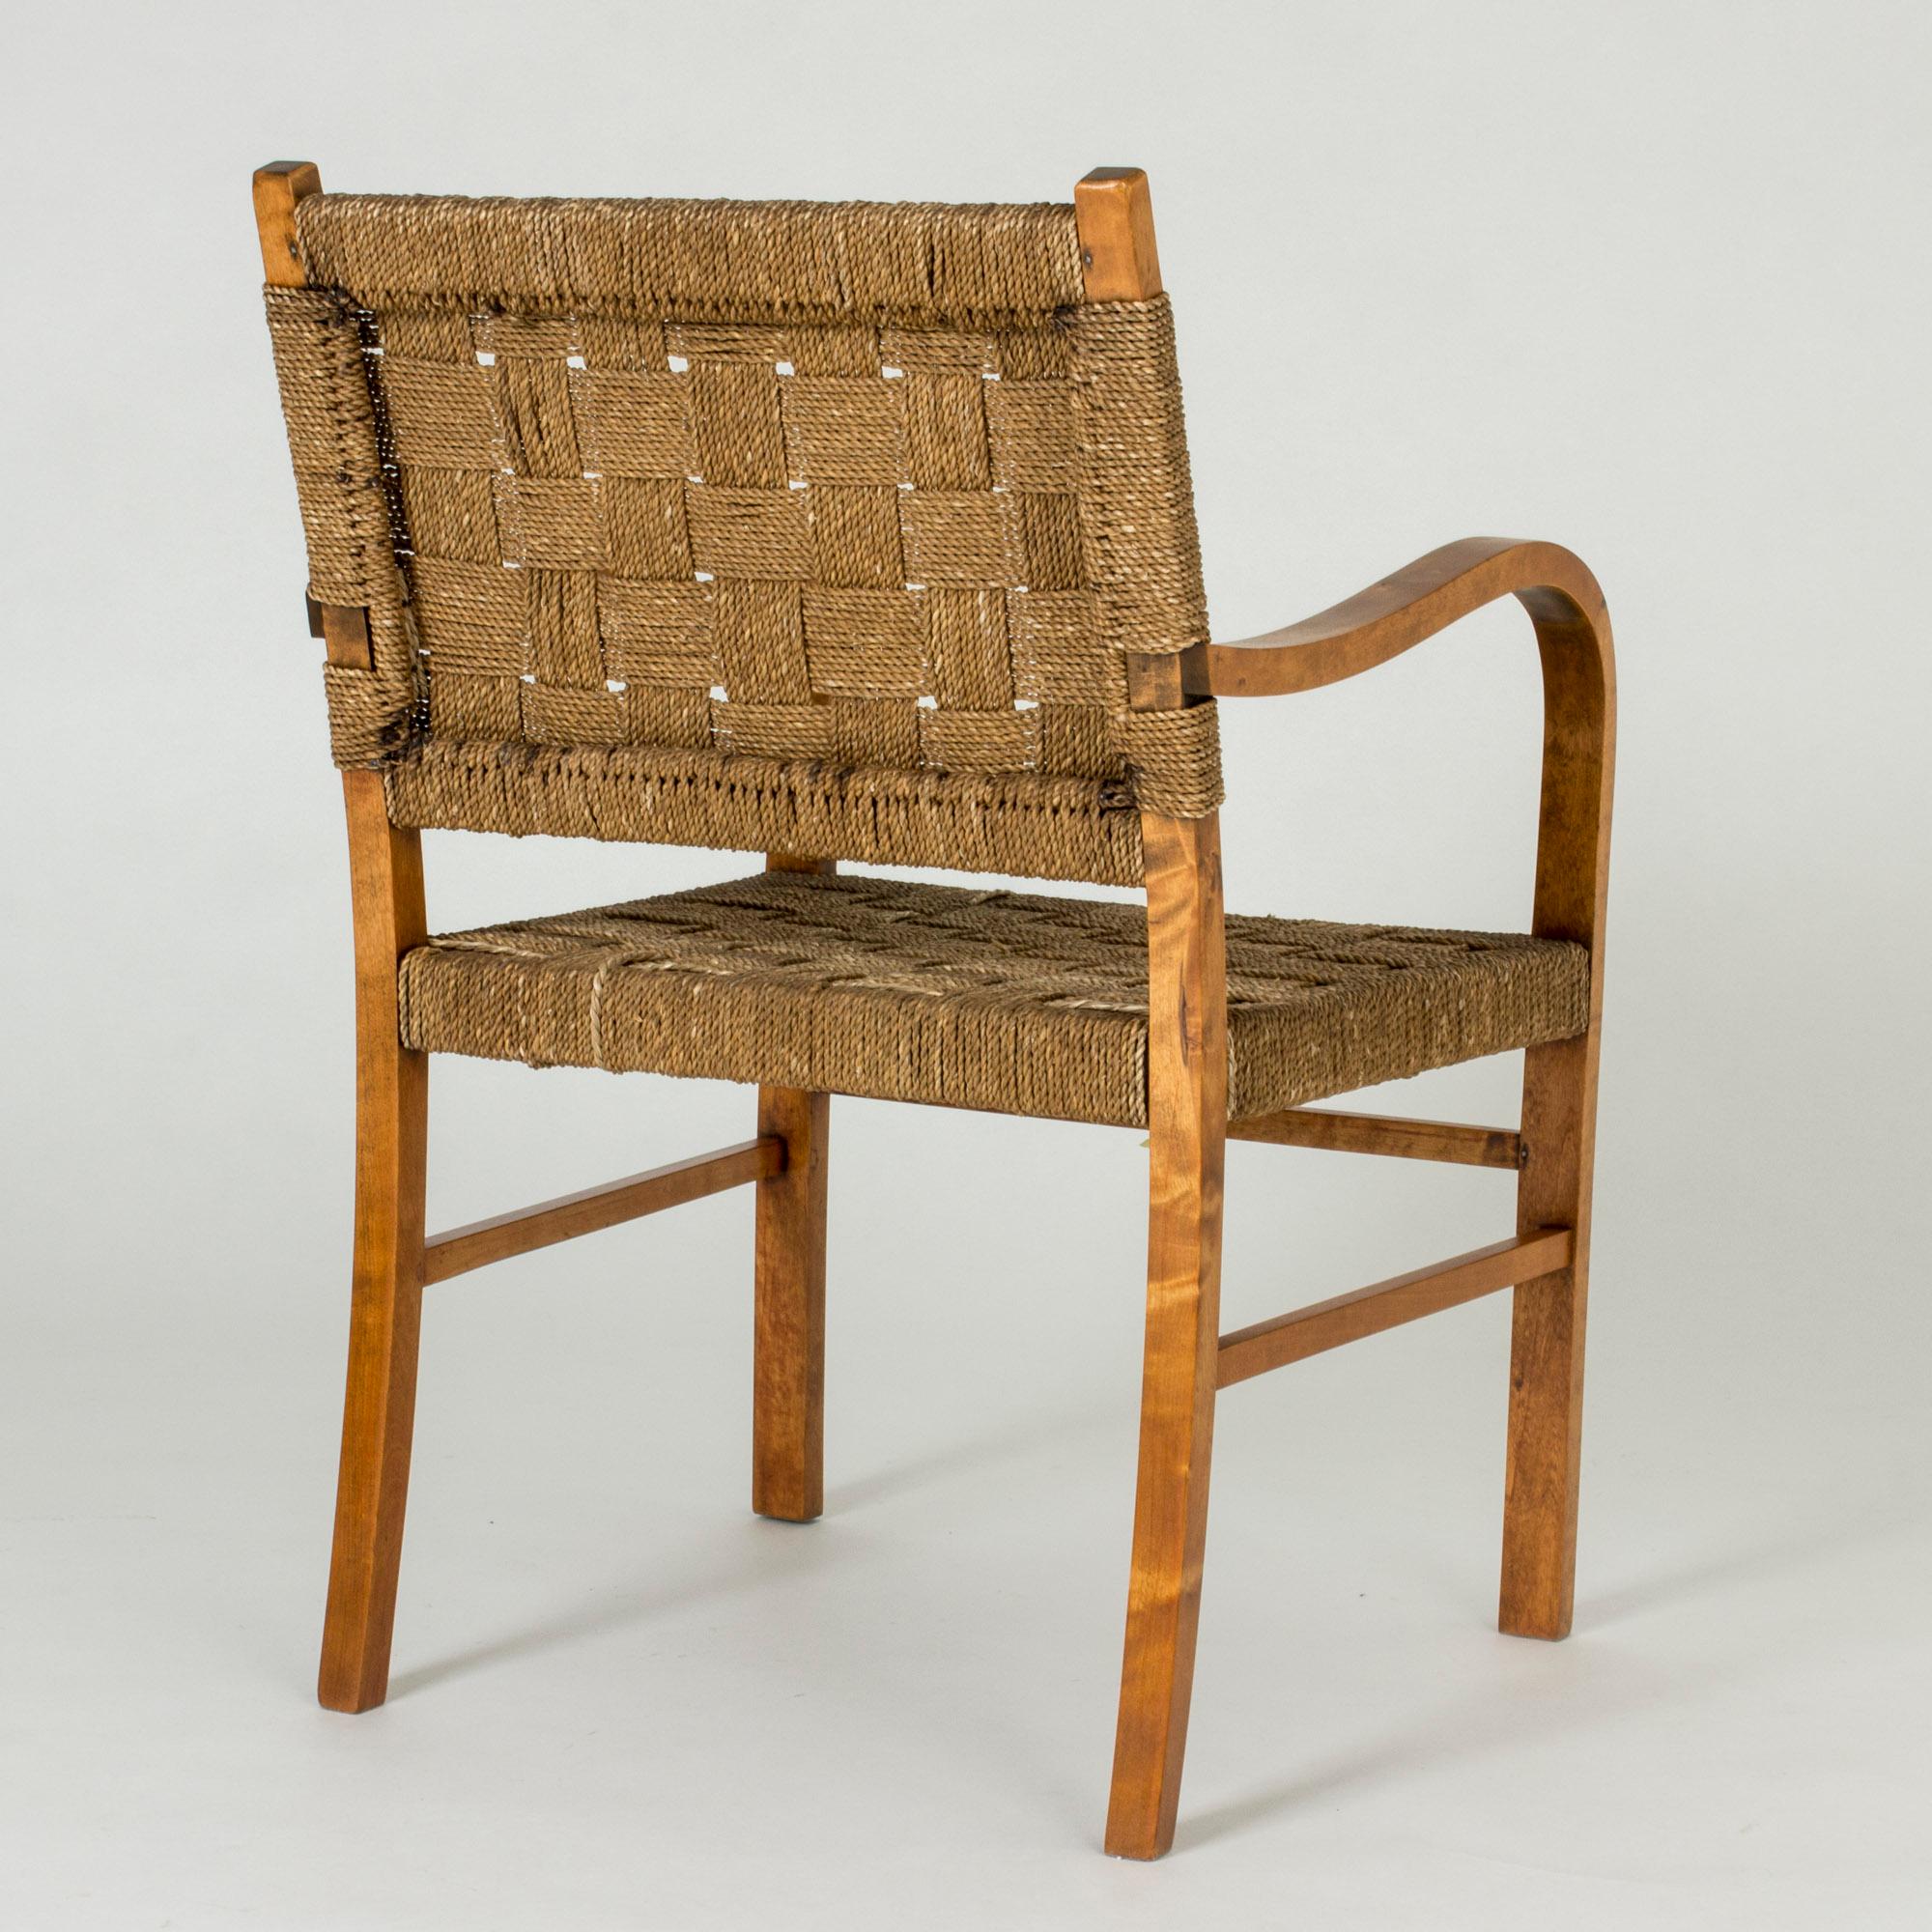 Rope Functionalist Armchair by Axel Larsson for Bodafors, Sweden, 1930s